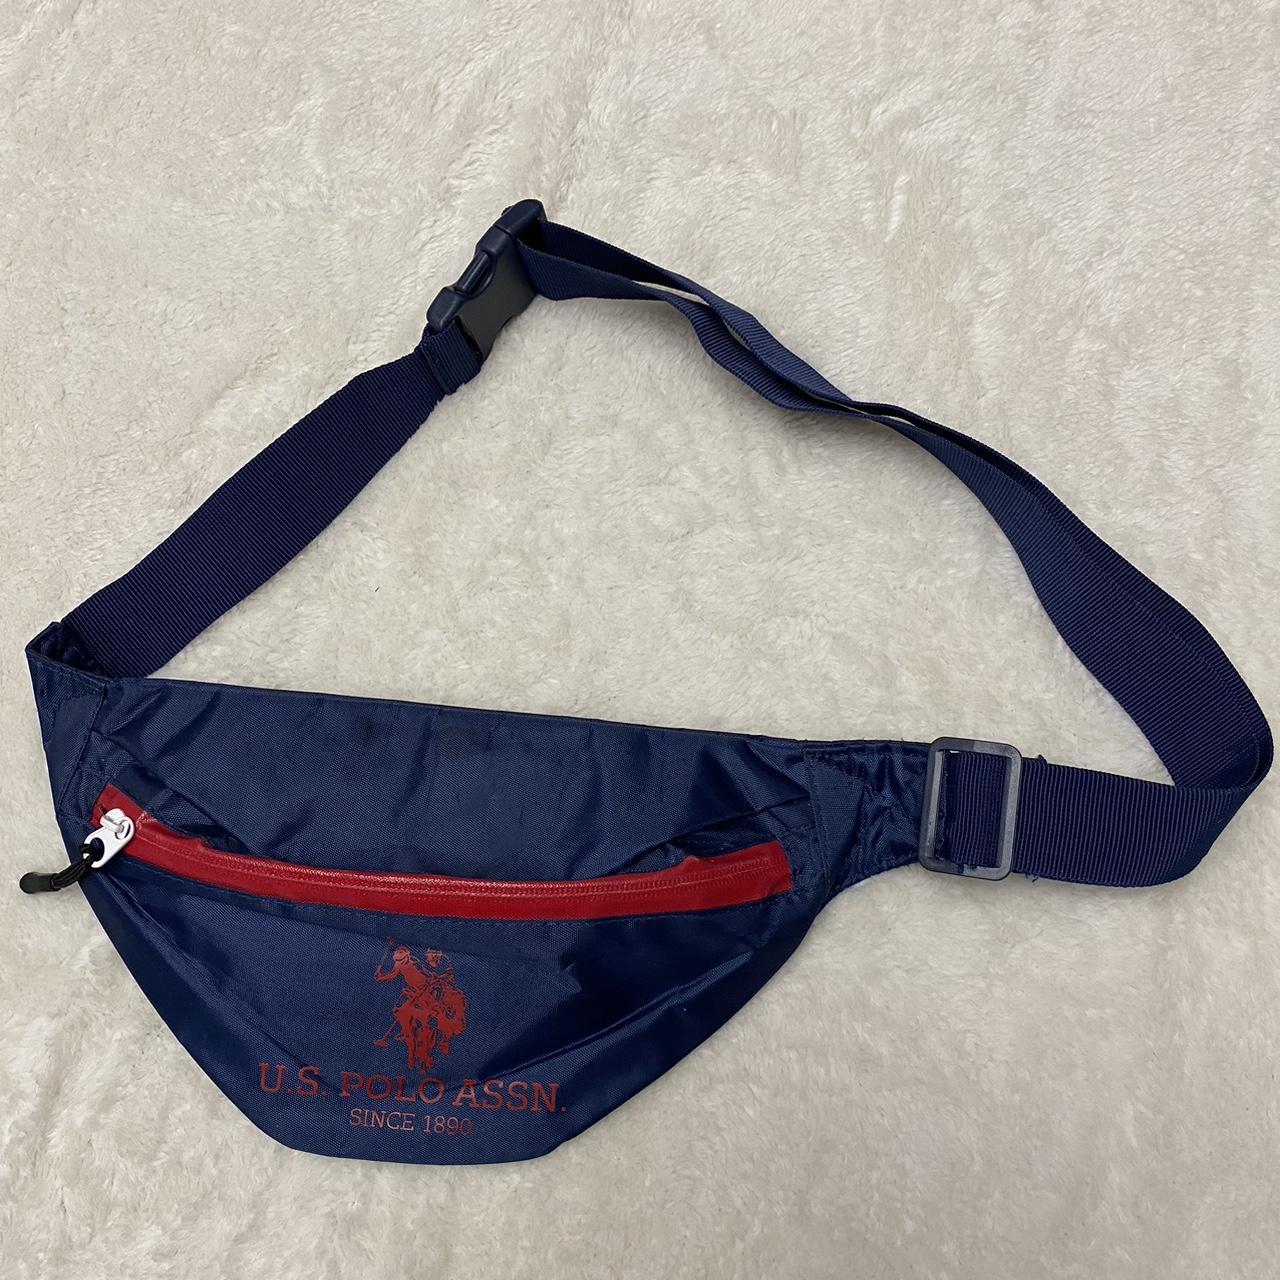 U.S. Polo Assn. Men's Navy and Red Bag